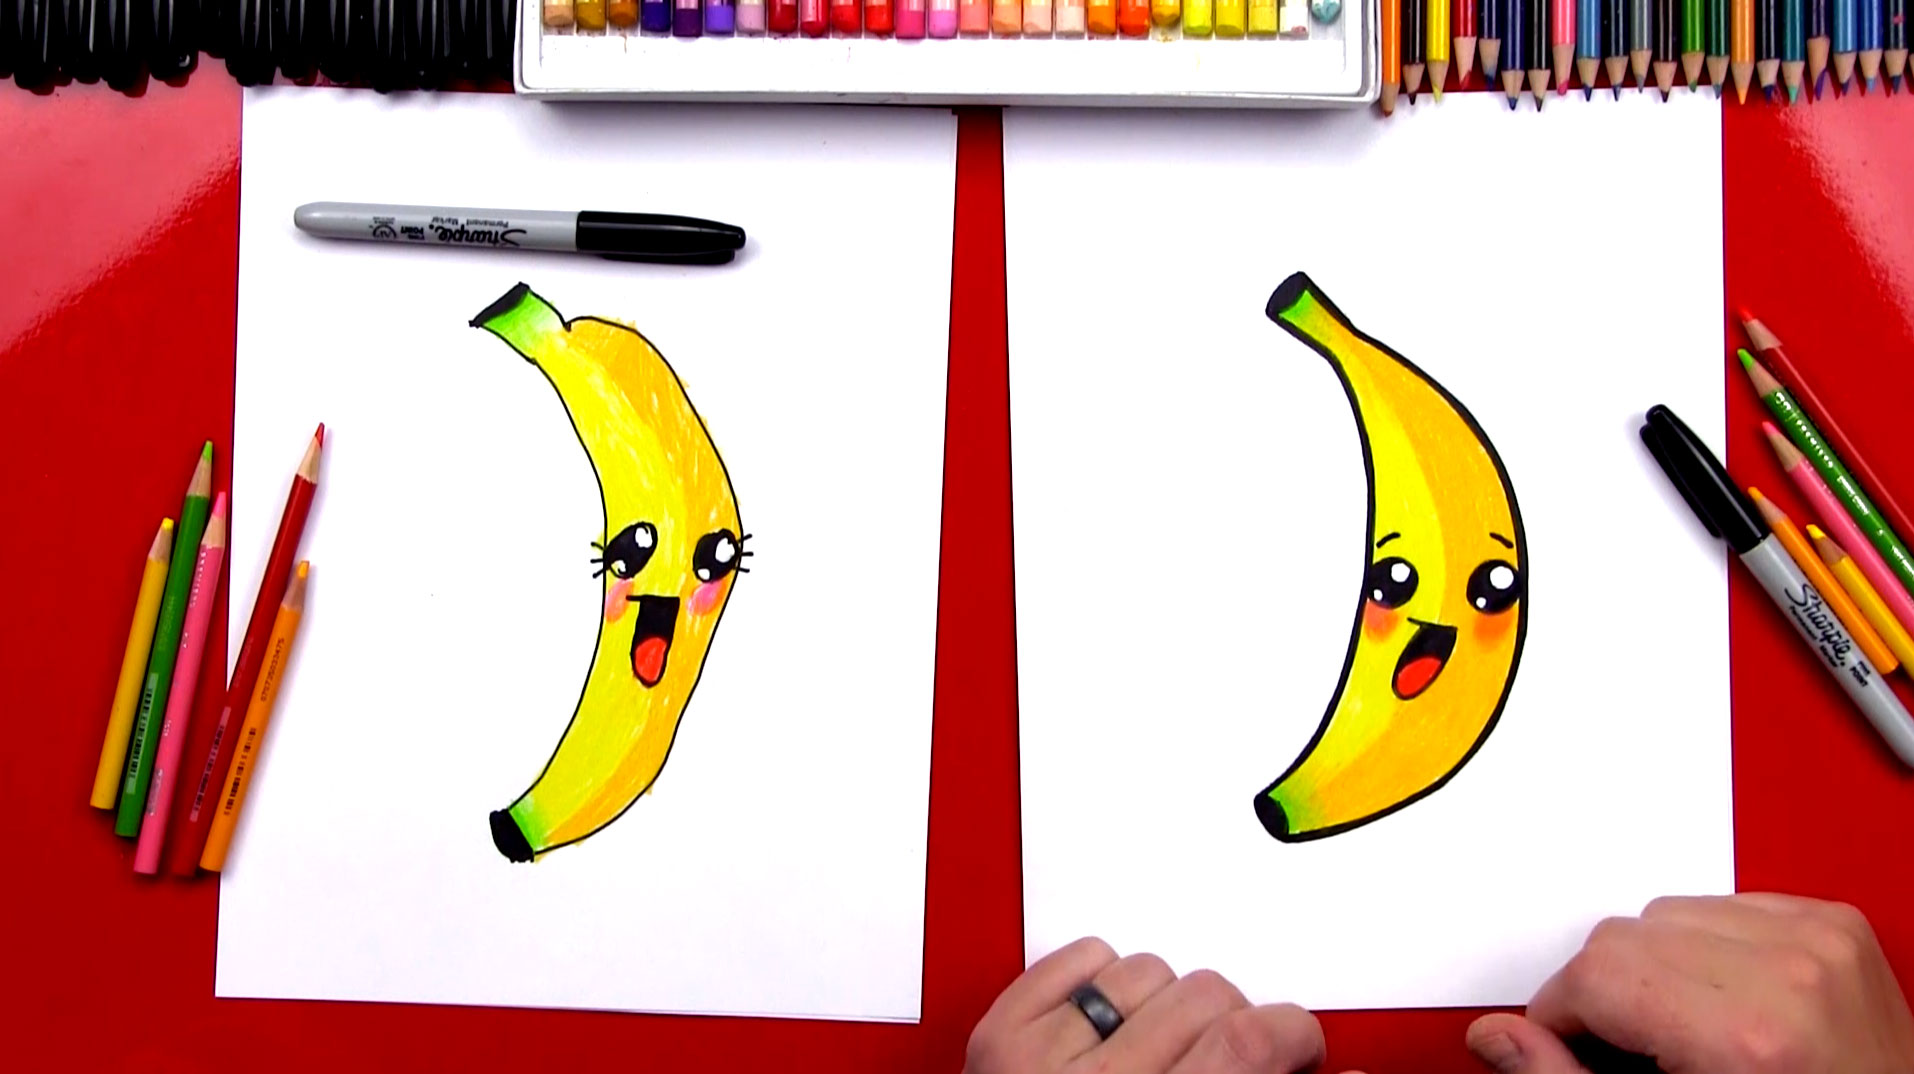 Banana Coloring Page For Kids Illustration | AI Free Download - Pikbest